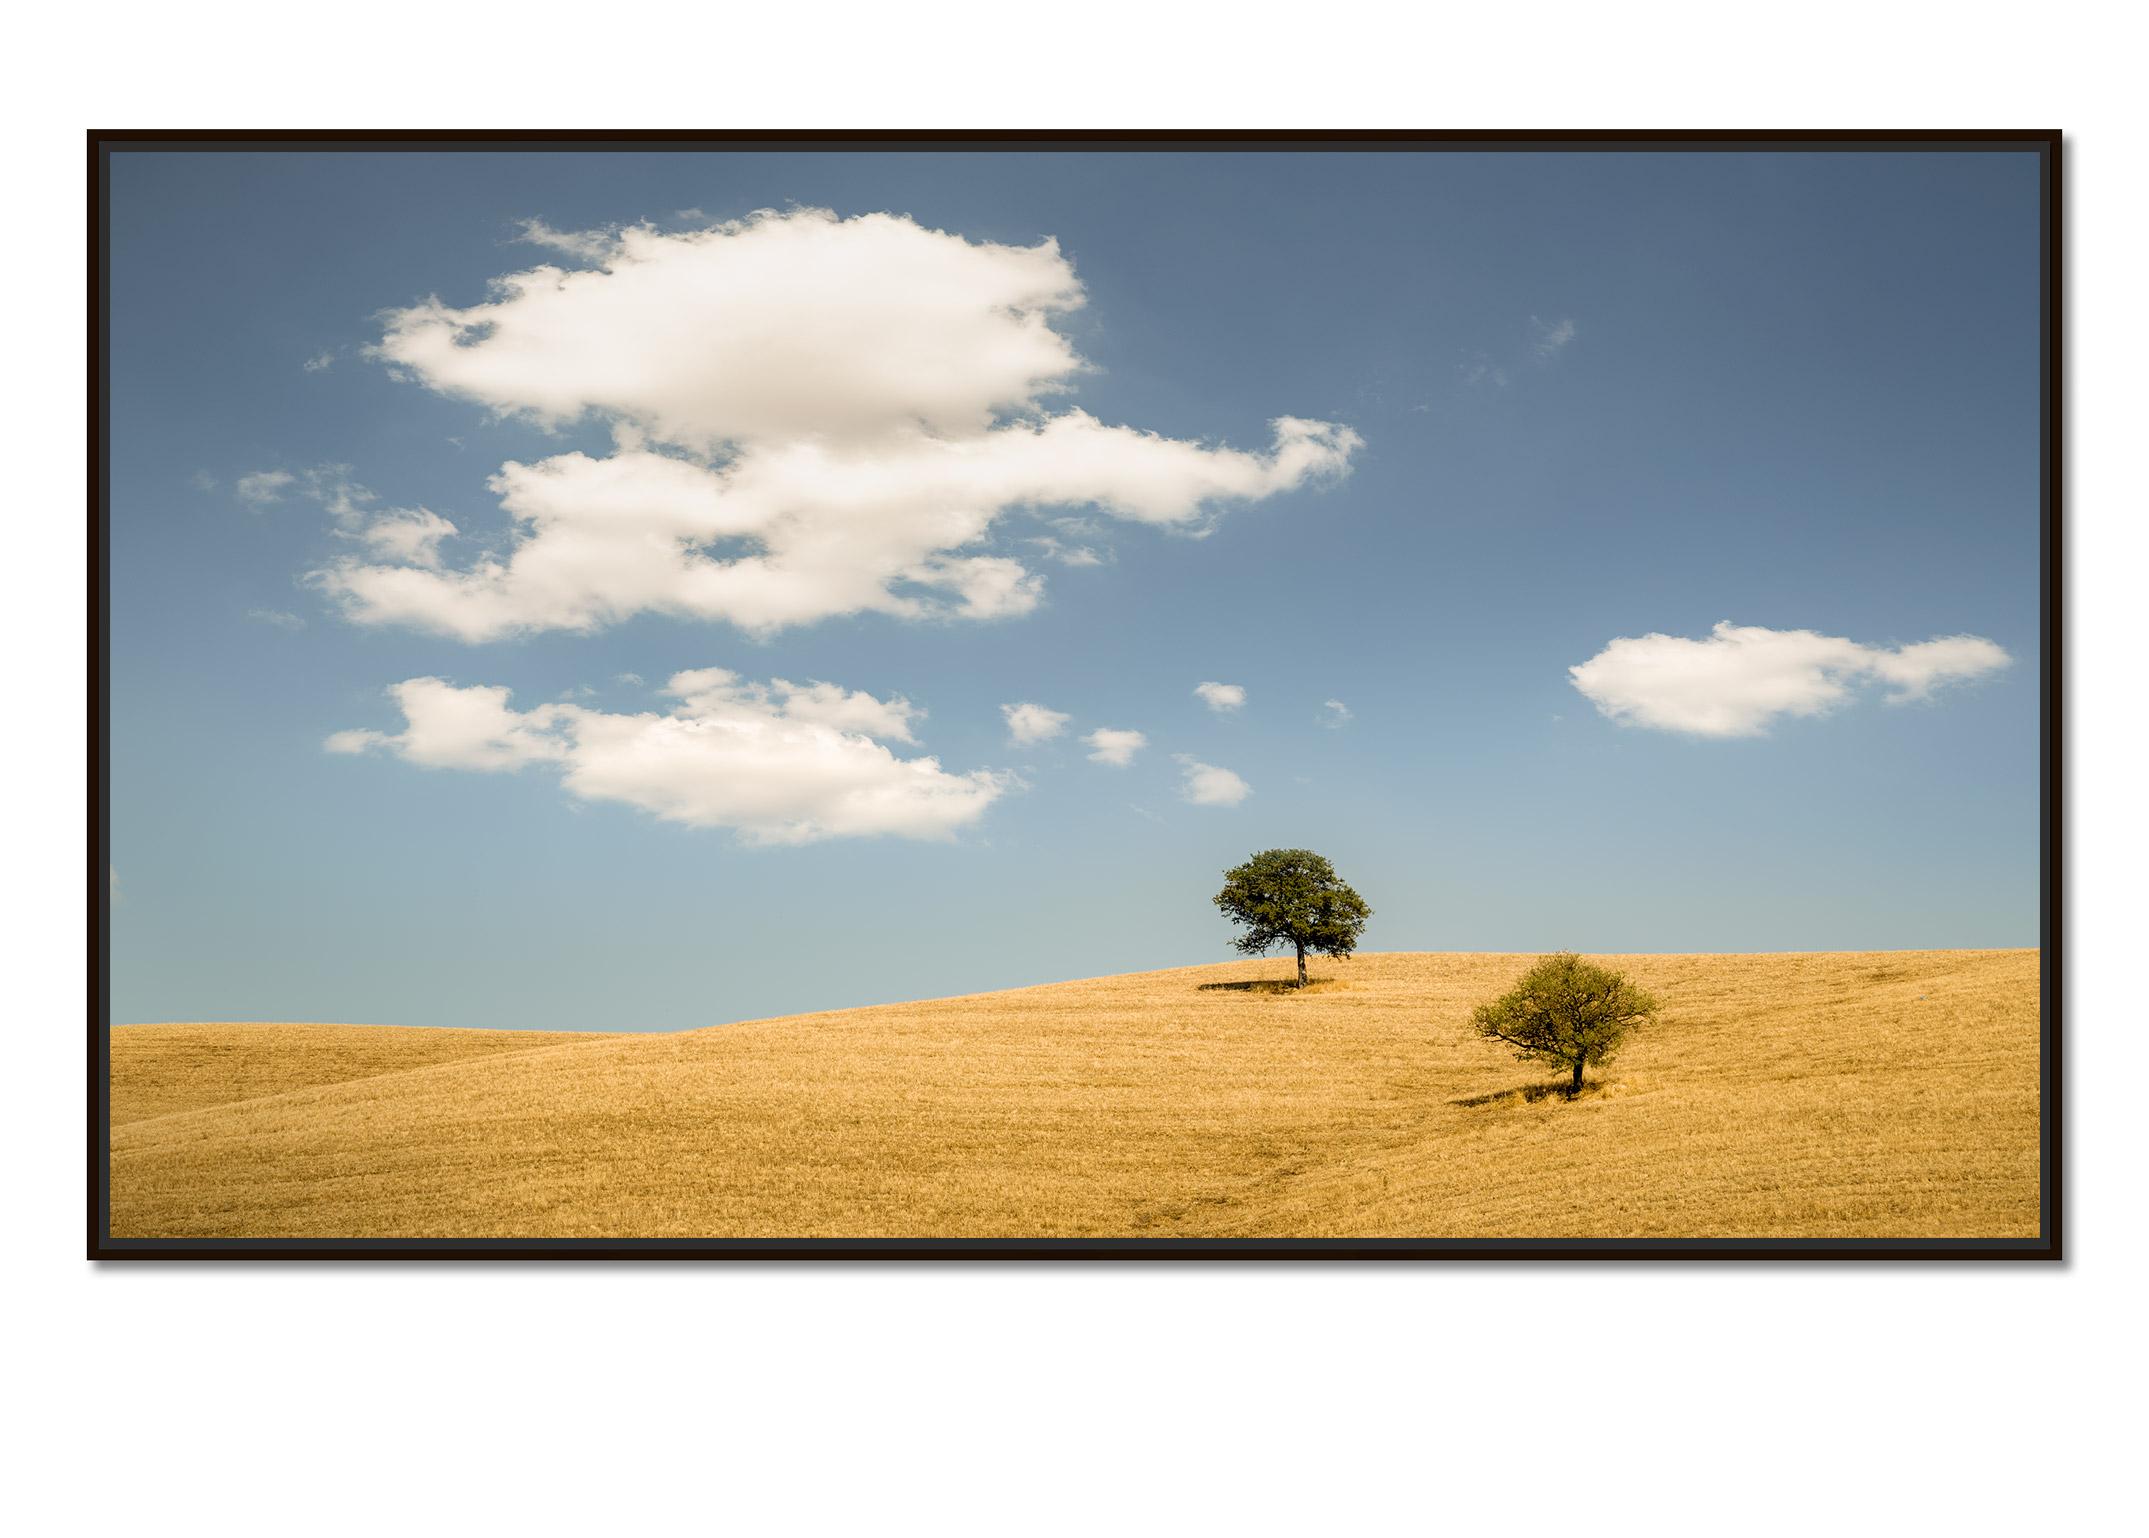 Rolling hills with Trees #2, Tuscany, Italy, Colour art photography, landscape - Photograph by Gerald Berghammer